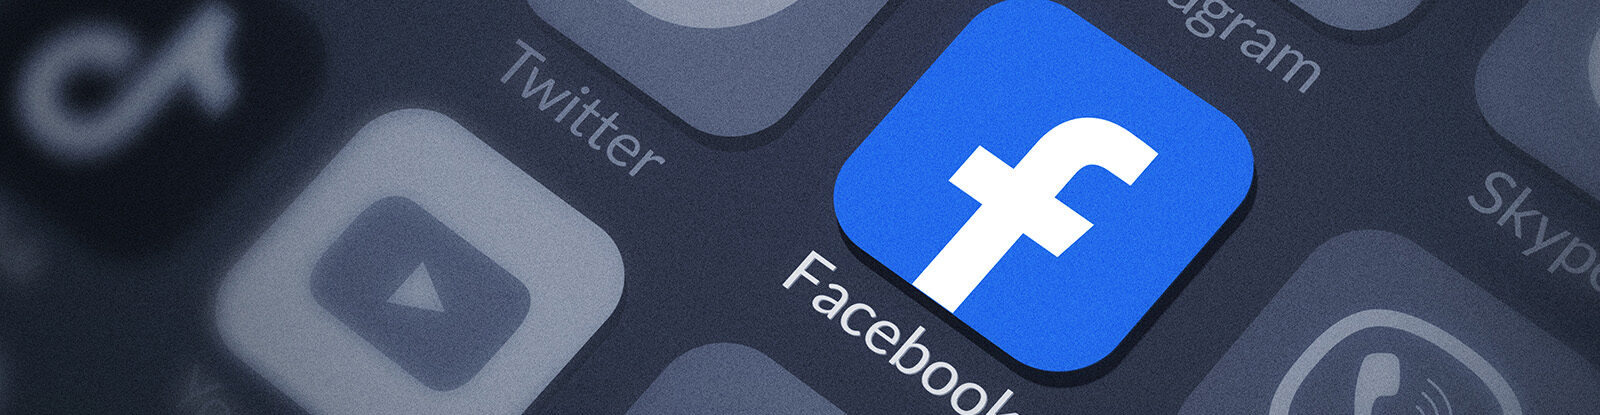 Greyed out social media apps with Facebook in color